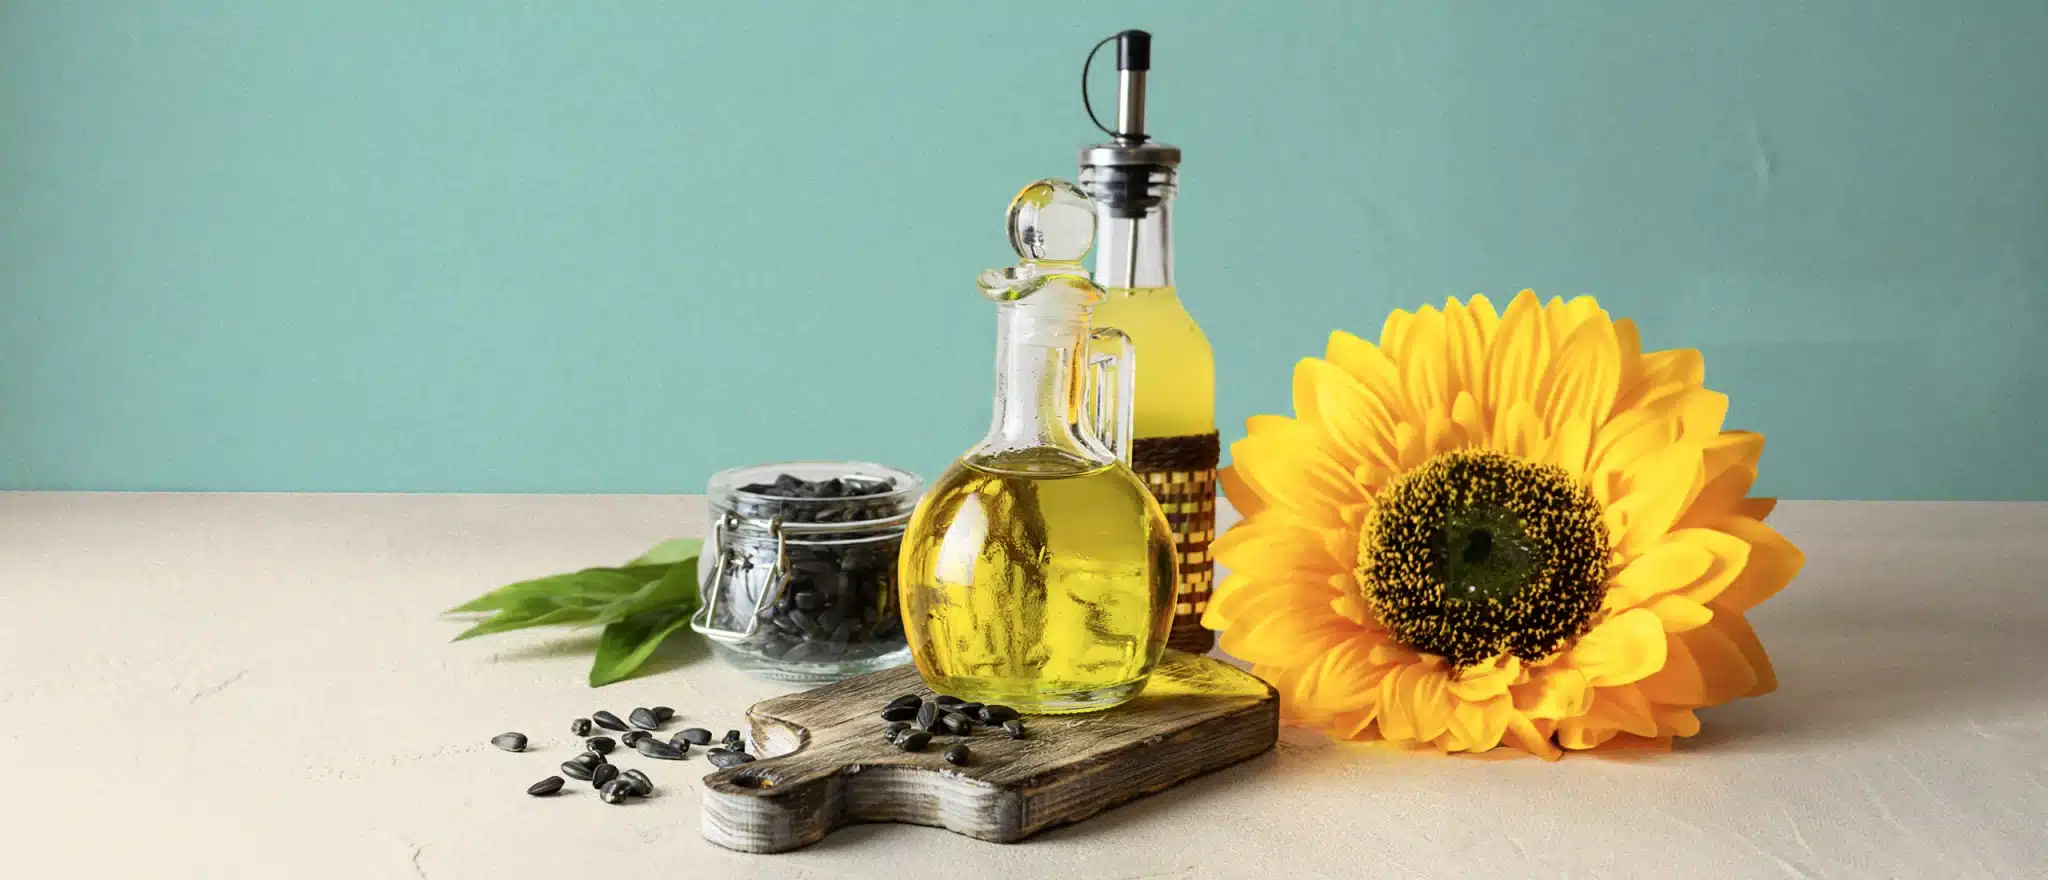 Are Seed Oils Really Toxic? Here’s What an R.D. Says